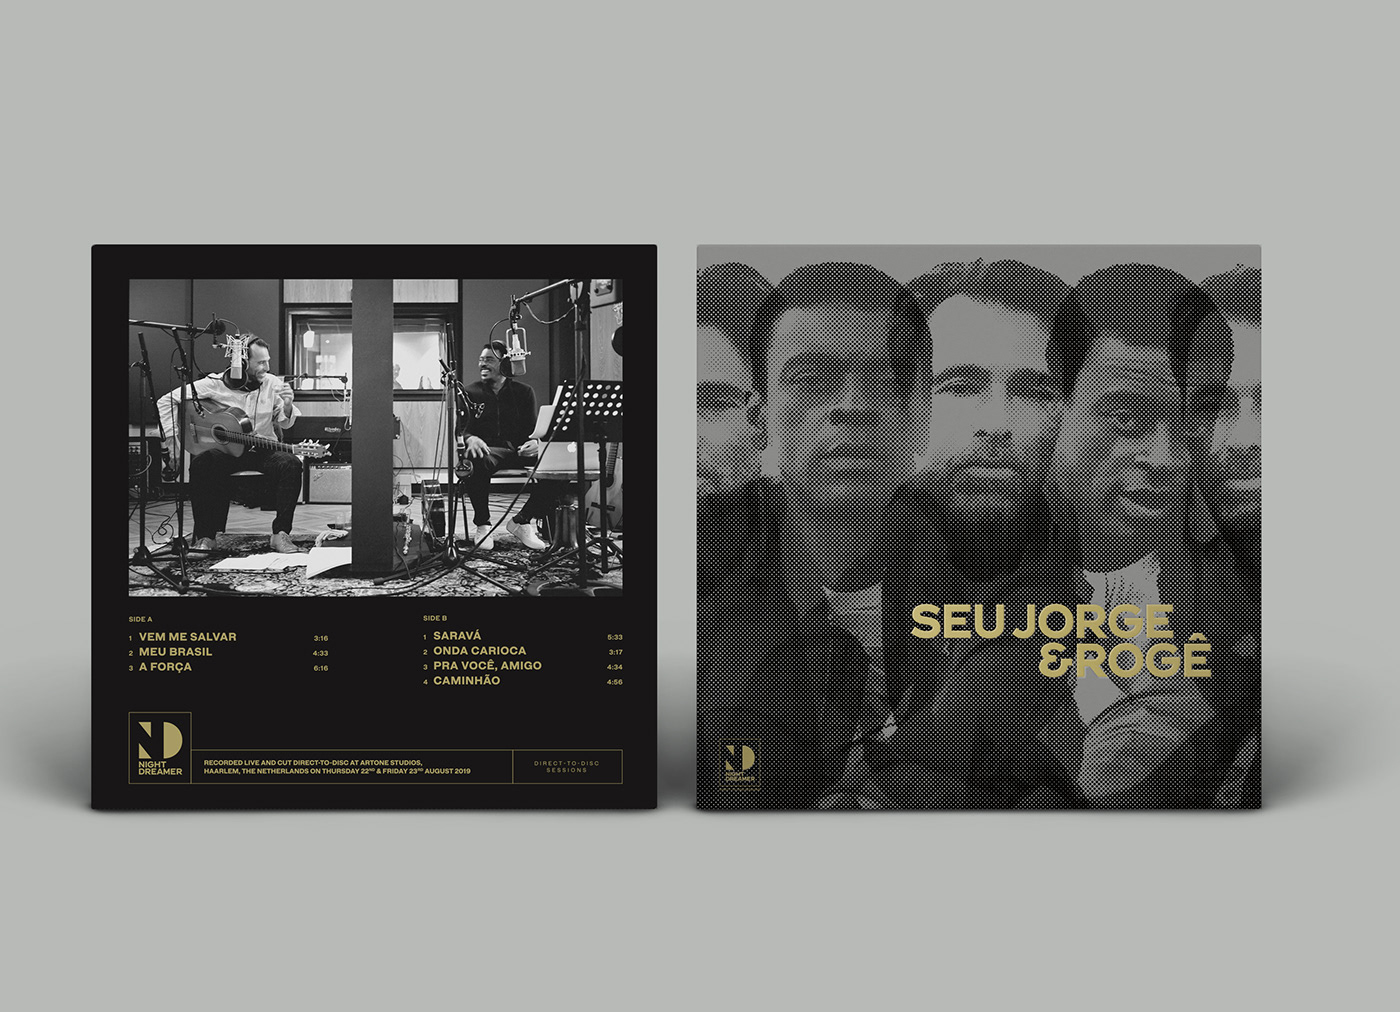 Front and Backcover for Seu Jorge & Rogê Vinyl Released by Night Dreamer Records.